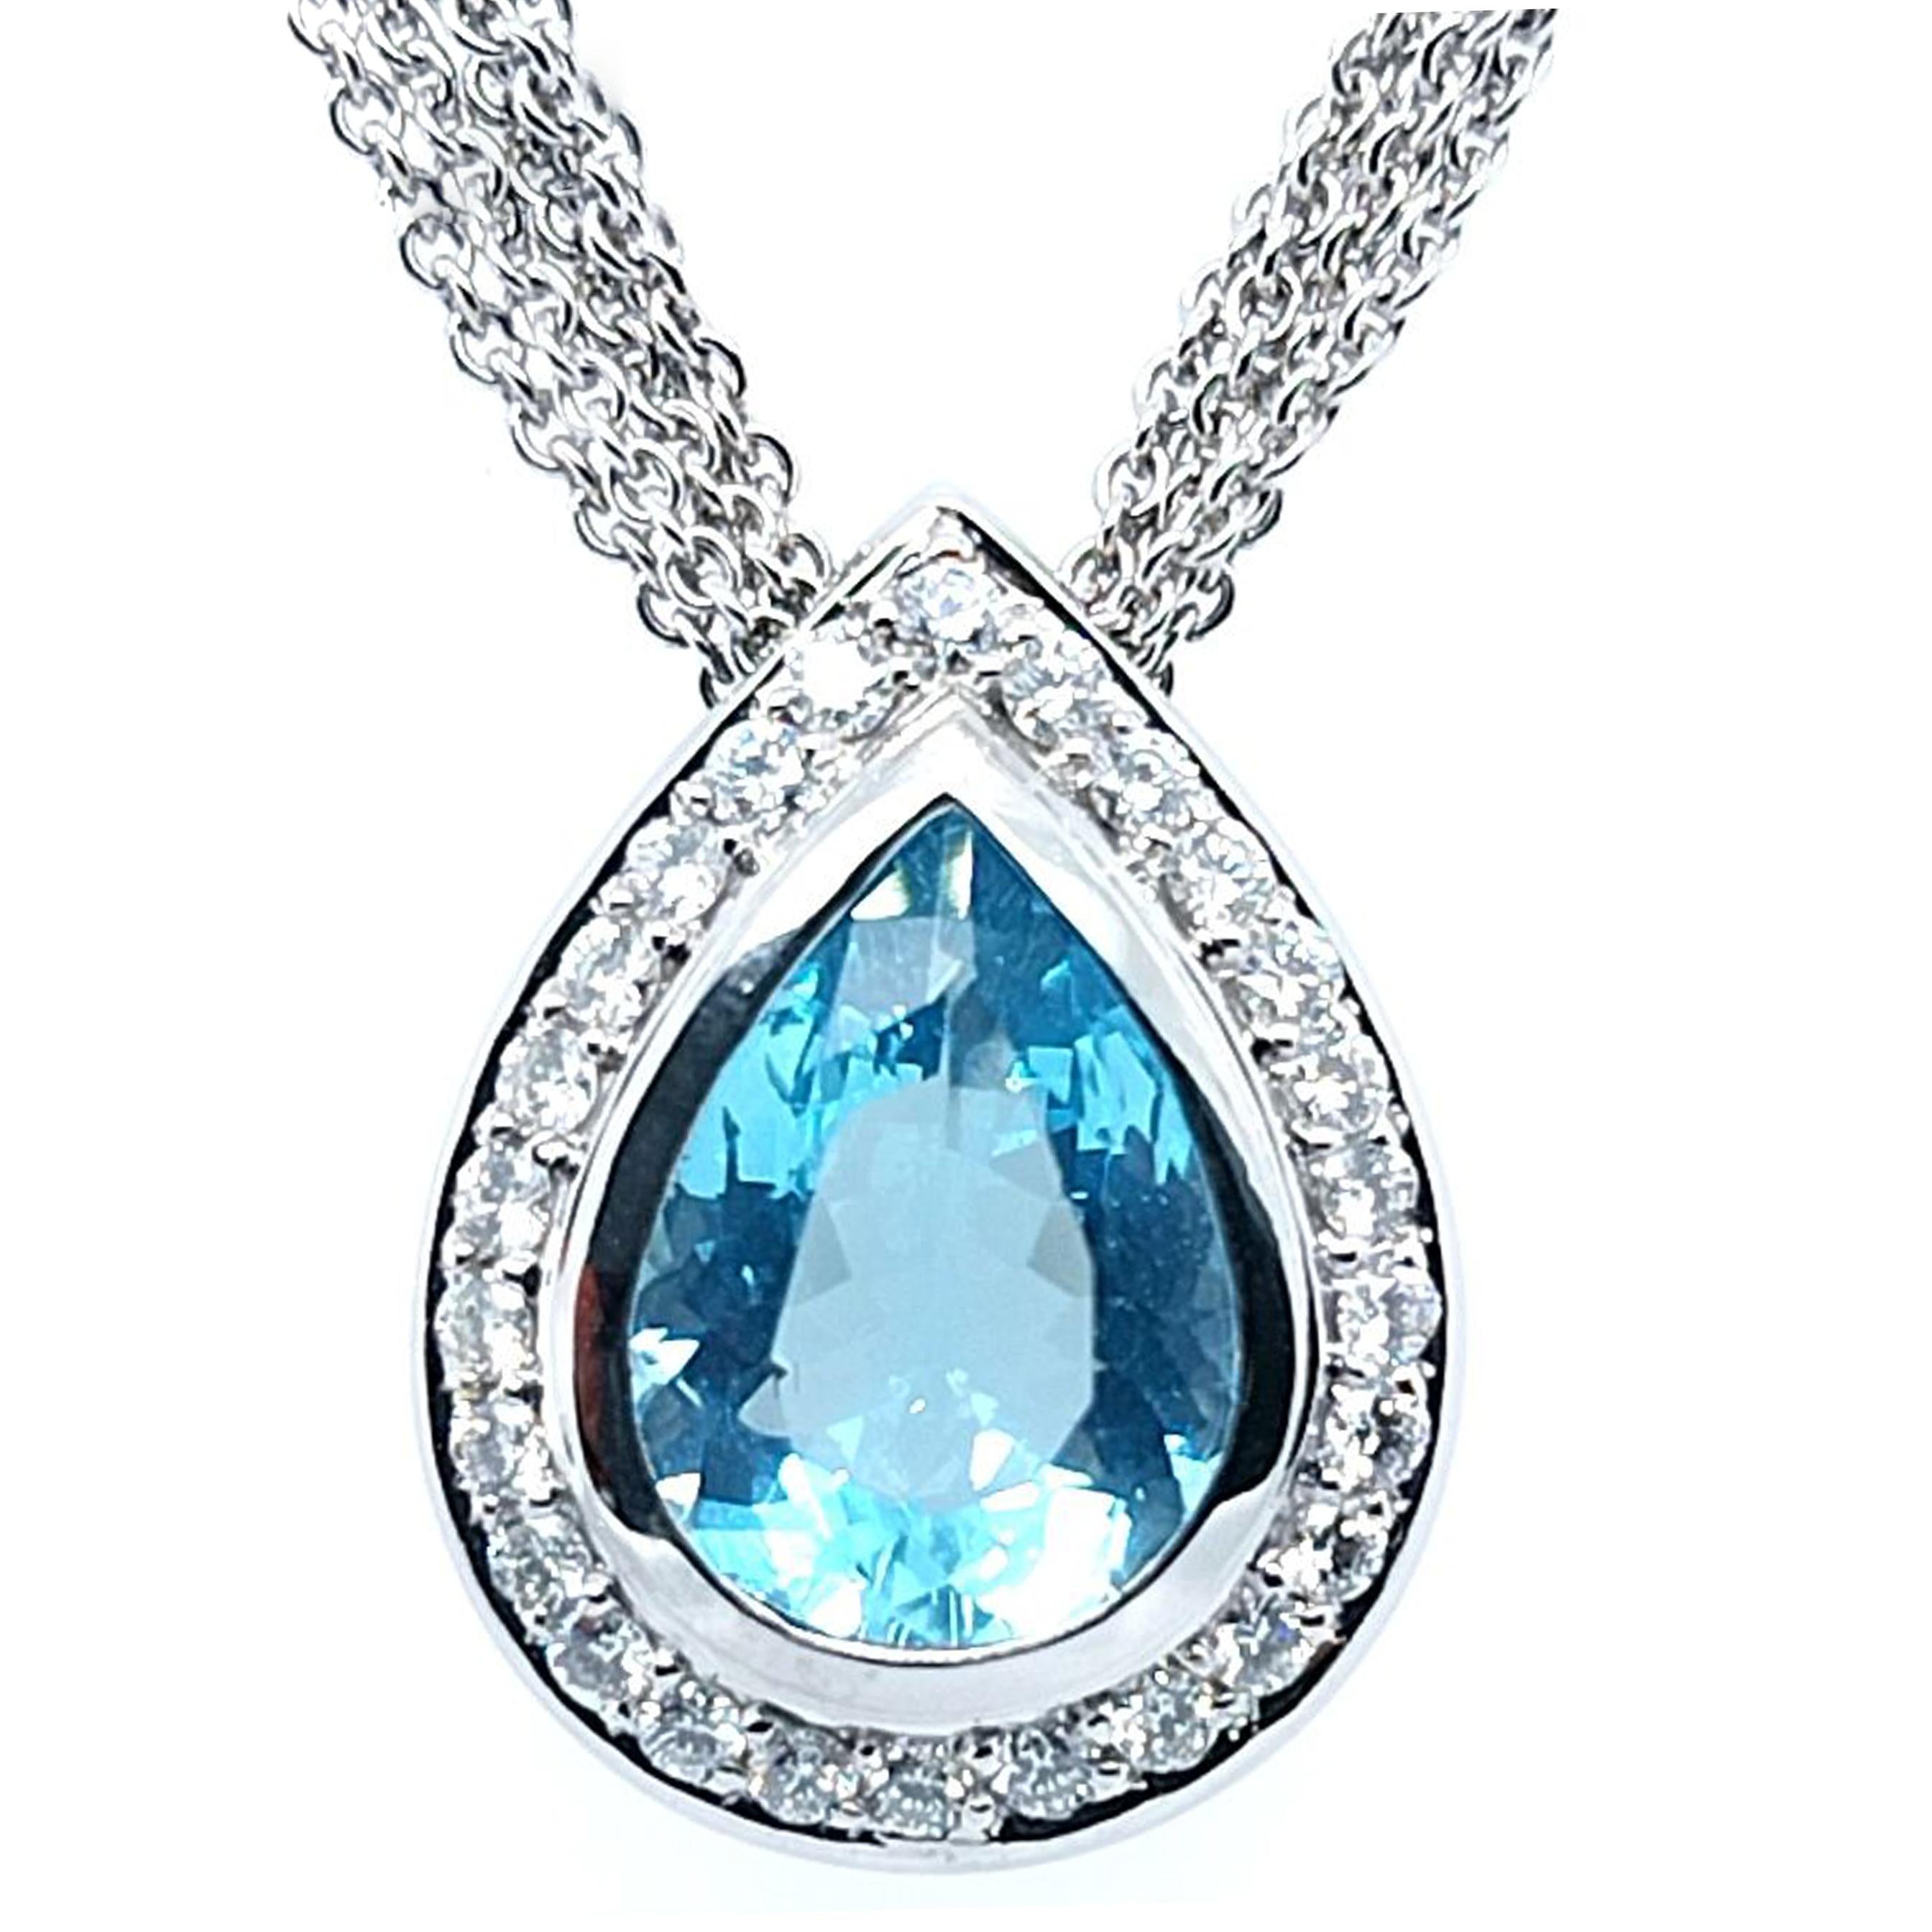 H&H Jewels 18 Karat White Gold Pendant Necklace Featuring A Bezel-set Pear Cut Aquamarine Estimated to Weight 3.00 Carats Surrounded by 26 Channel-set Round Brilliant Cut Diamonds of VS Clarity and G Color Totaling 0.52 Carats. Multi-strand Rolo